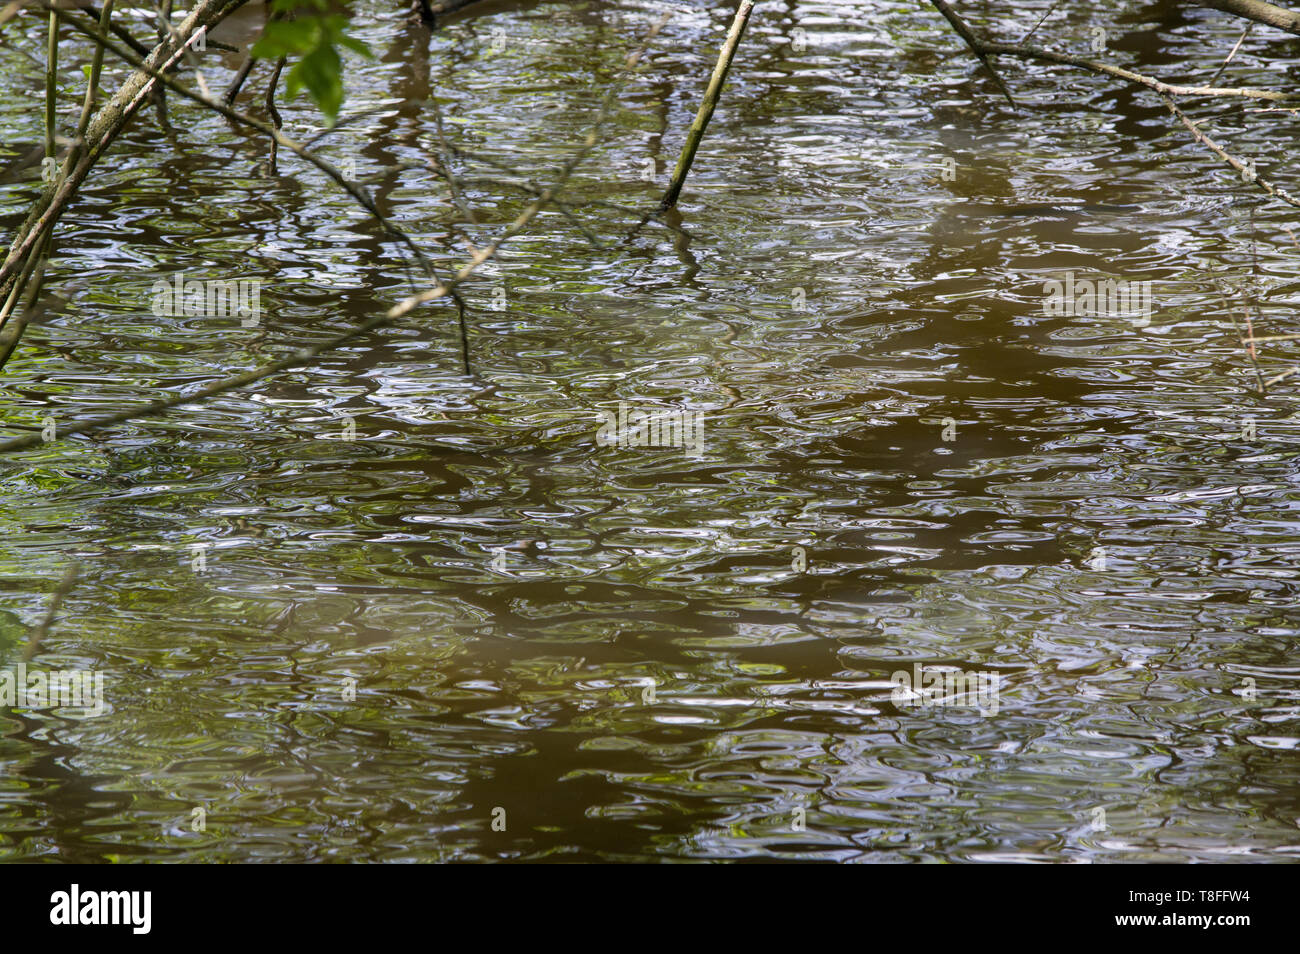 Tree branches reflected in water form an abstract greenish background Stock Photo